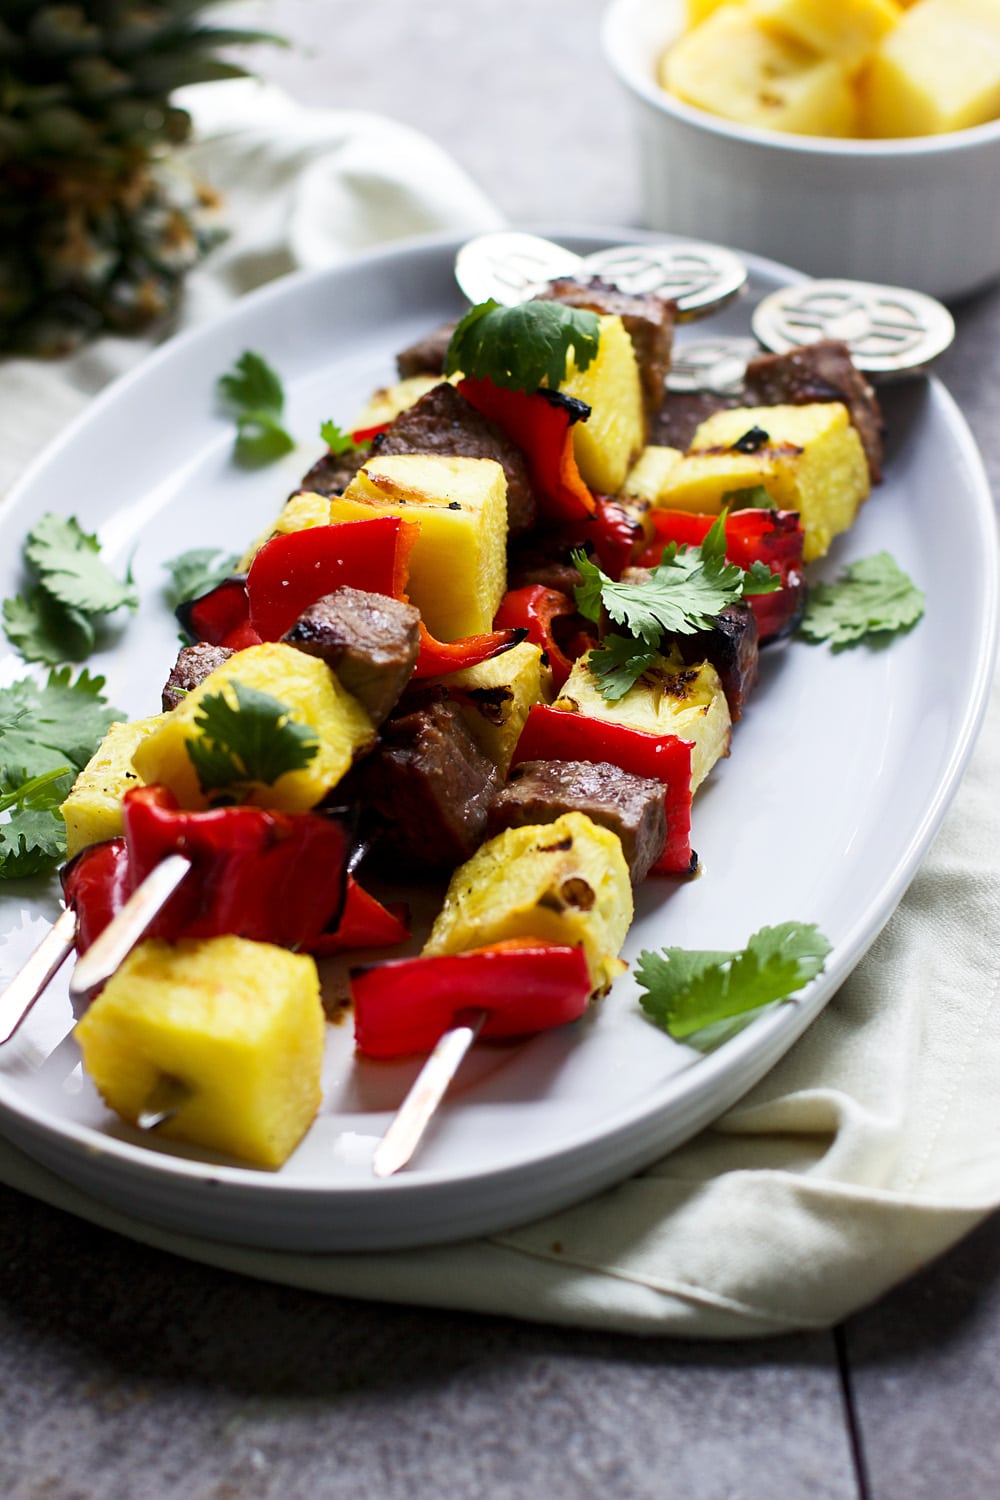 Marinated Sirloin, Pineapple and Red Pepper Skewers 6